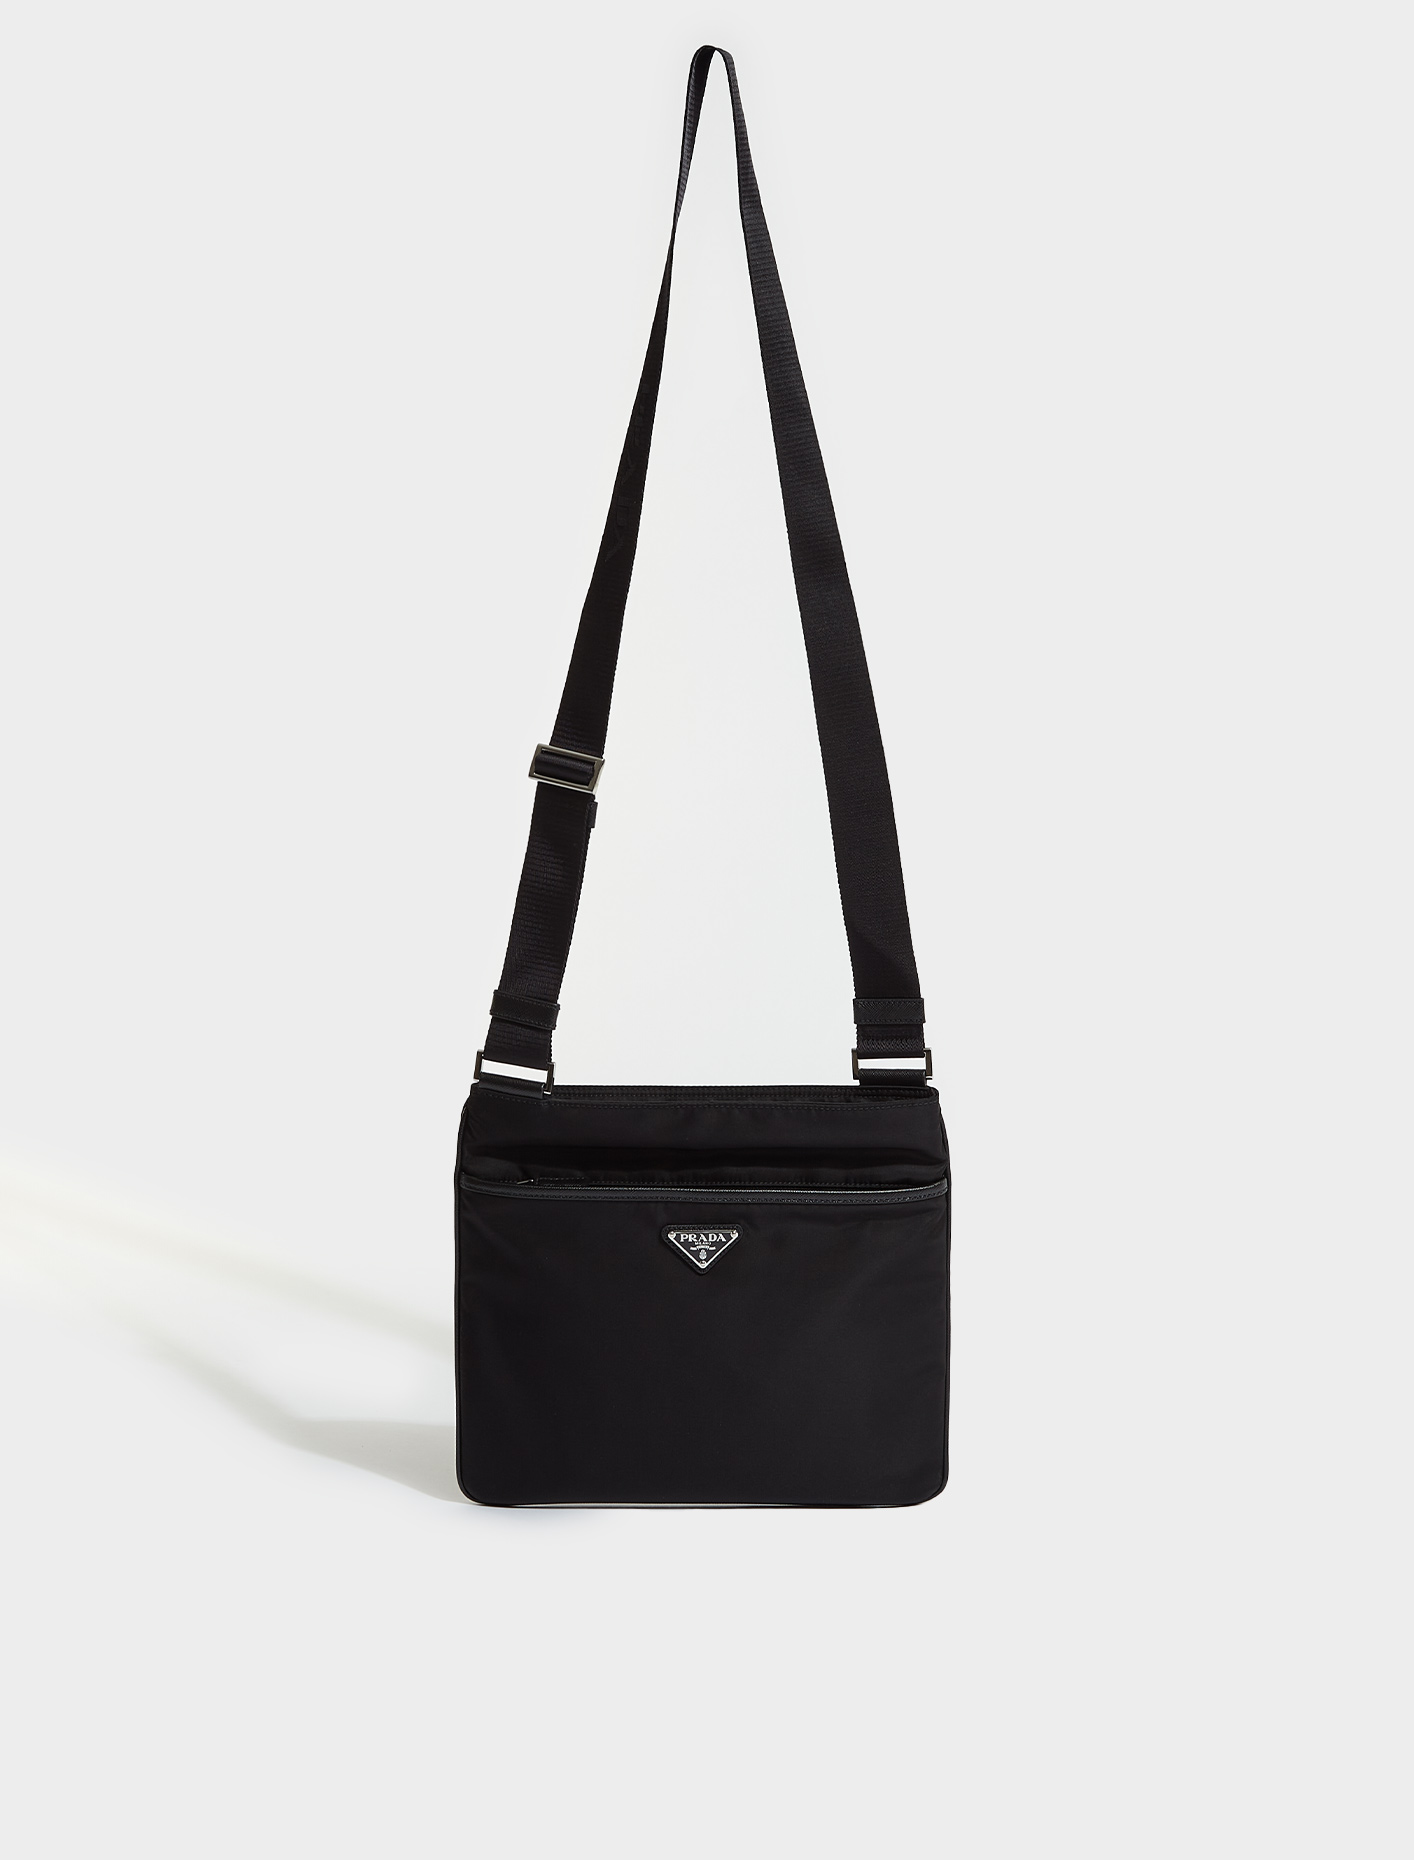 Prada Re-Nylon and Saffiano Leather Bag with Strap in Black | Voo 